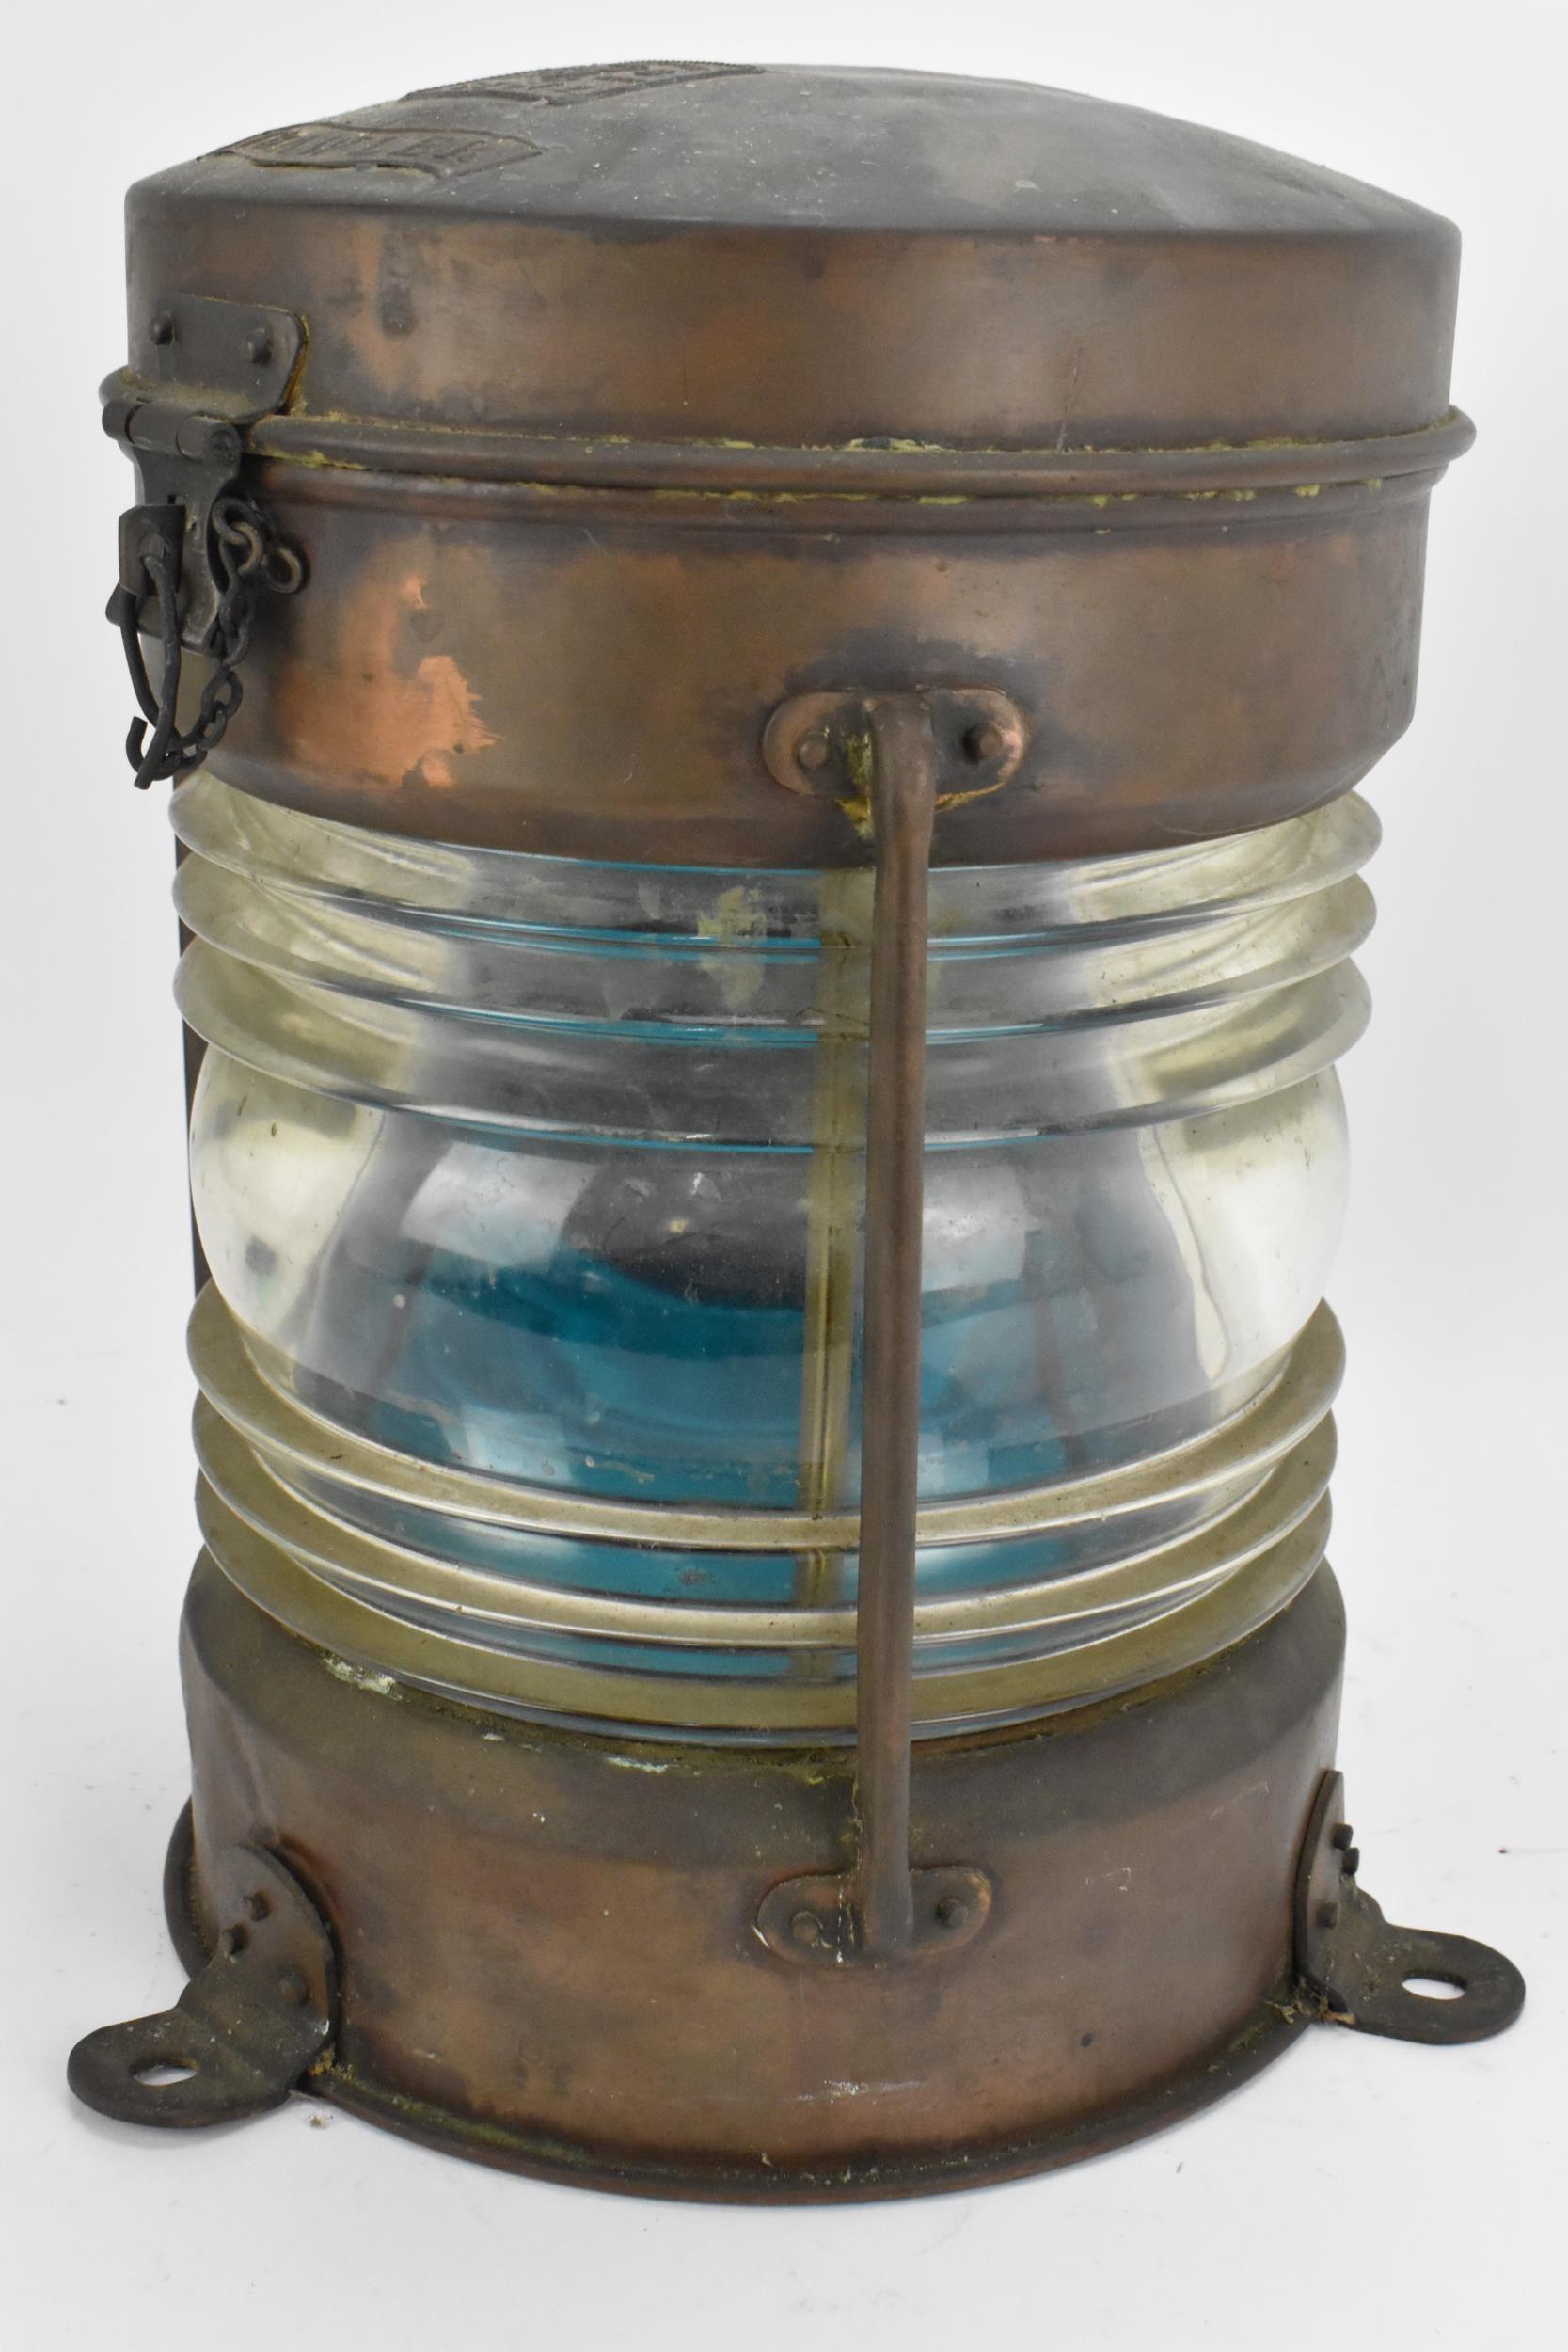 A copper and brass ship's lantern by Seahorse, no. 52672, 'Trawler', with blue glass, 35 cm high - Image 3 of 3